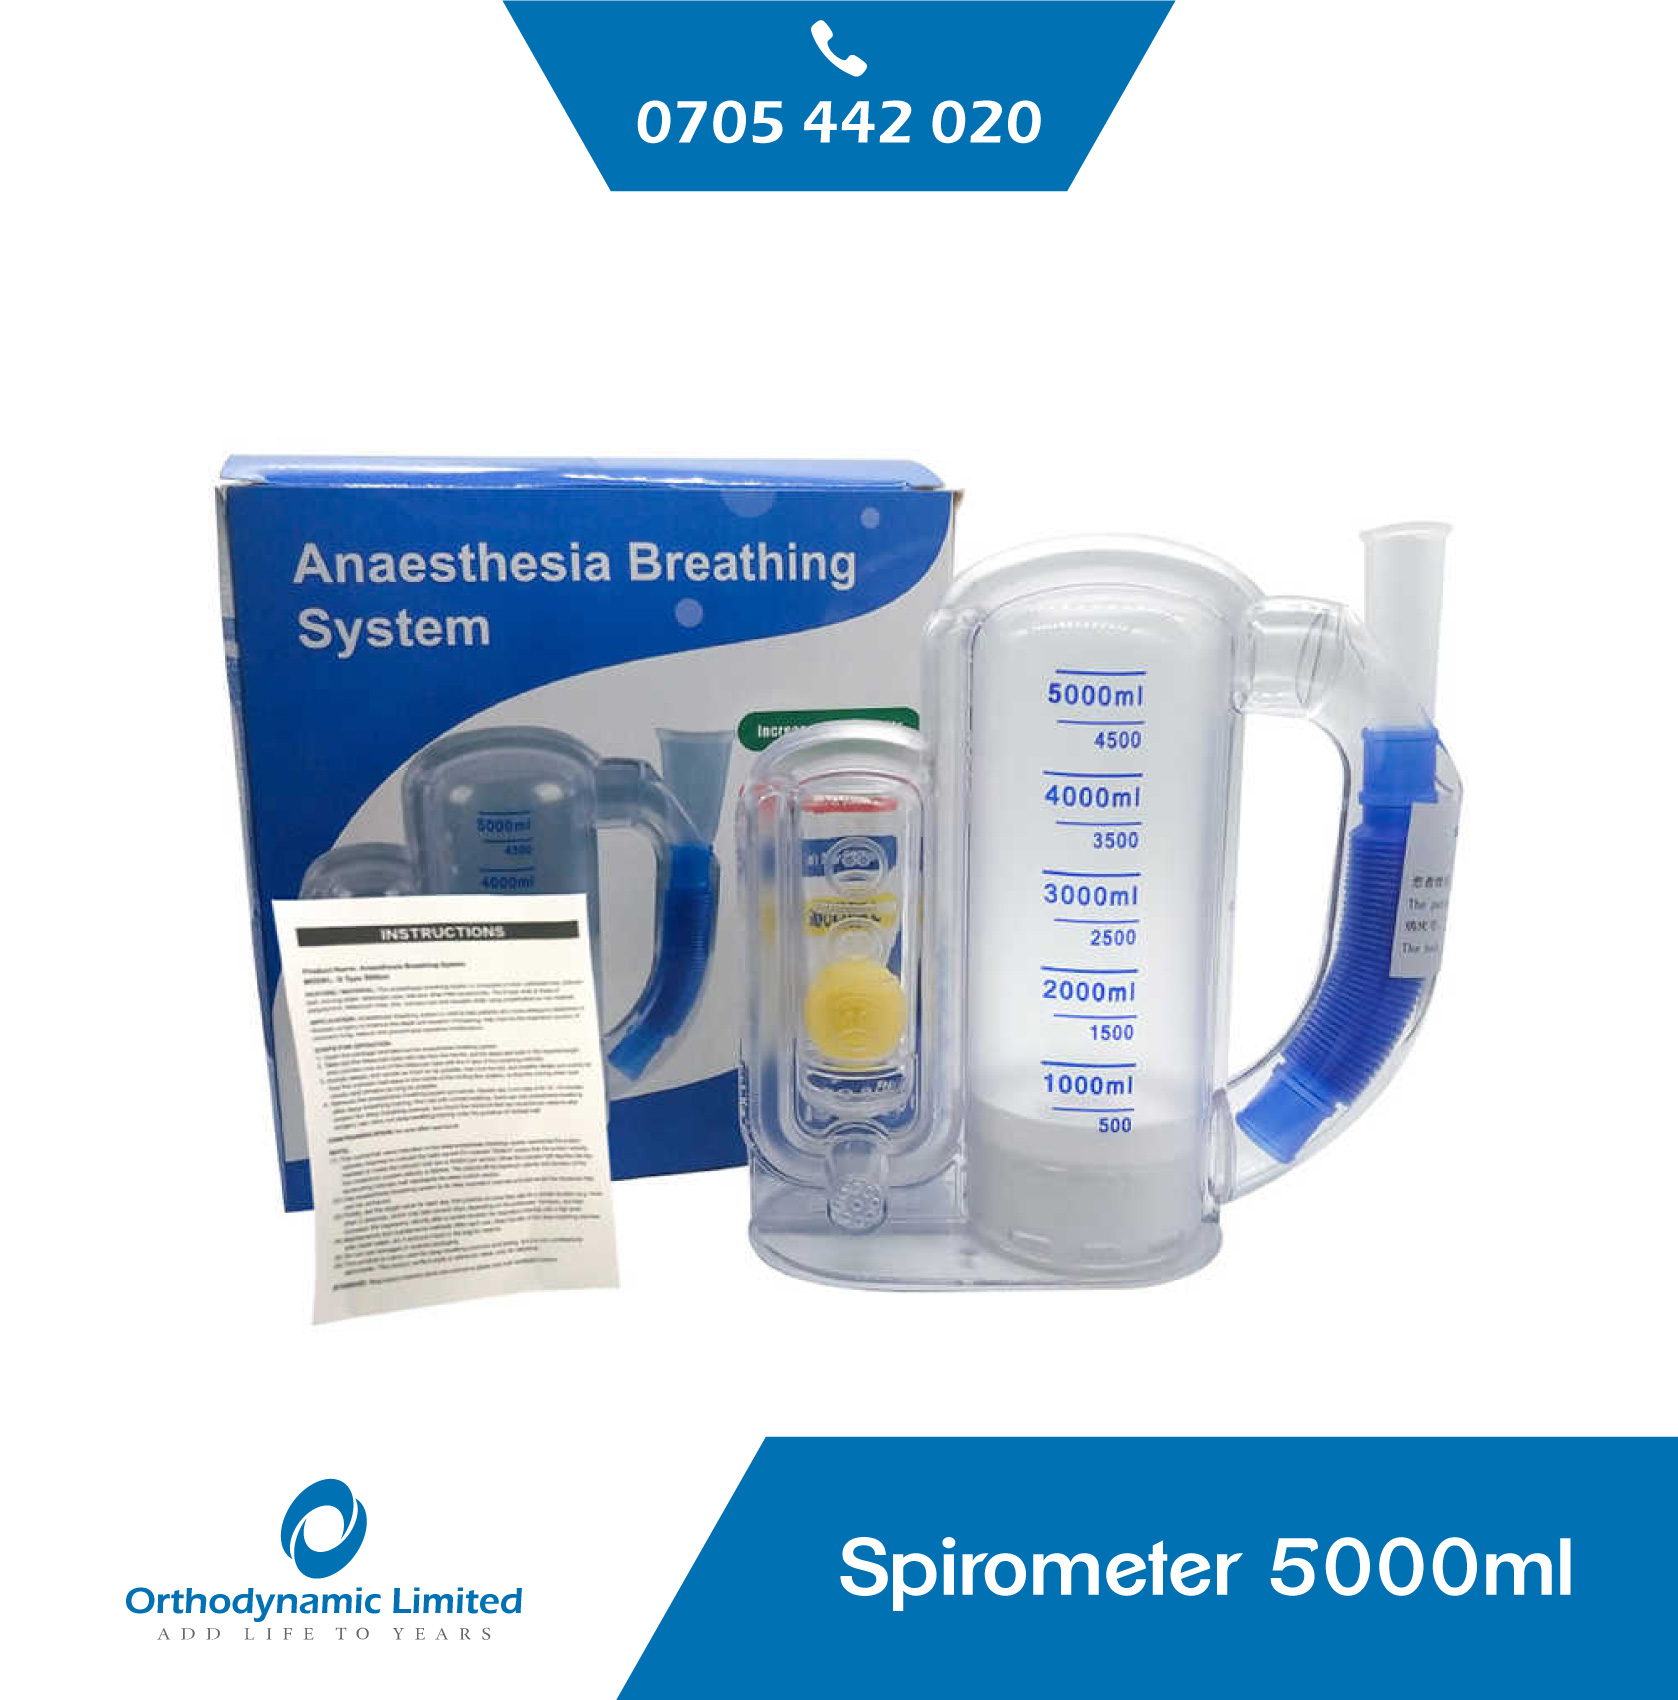 What is a spirometer, and how is it used?